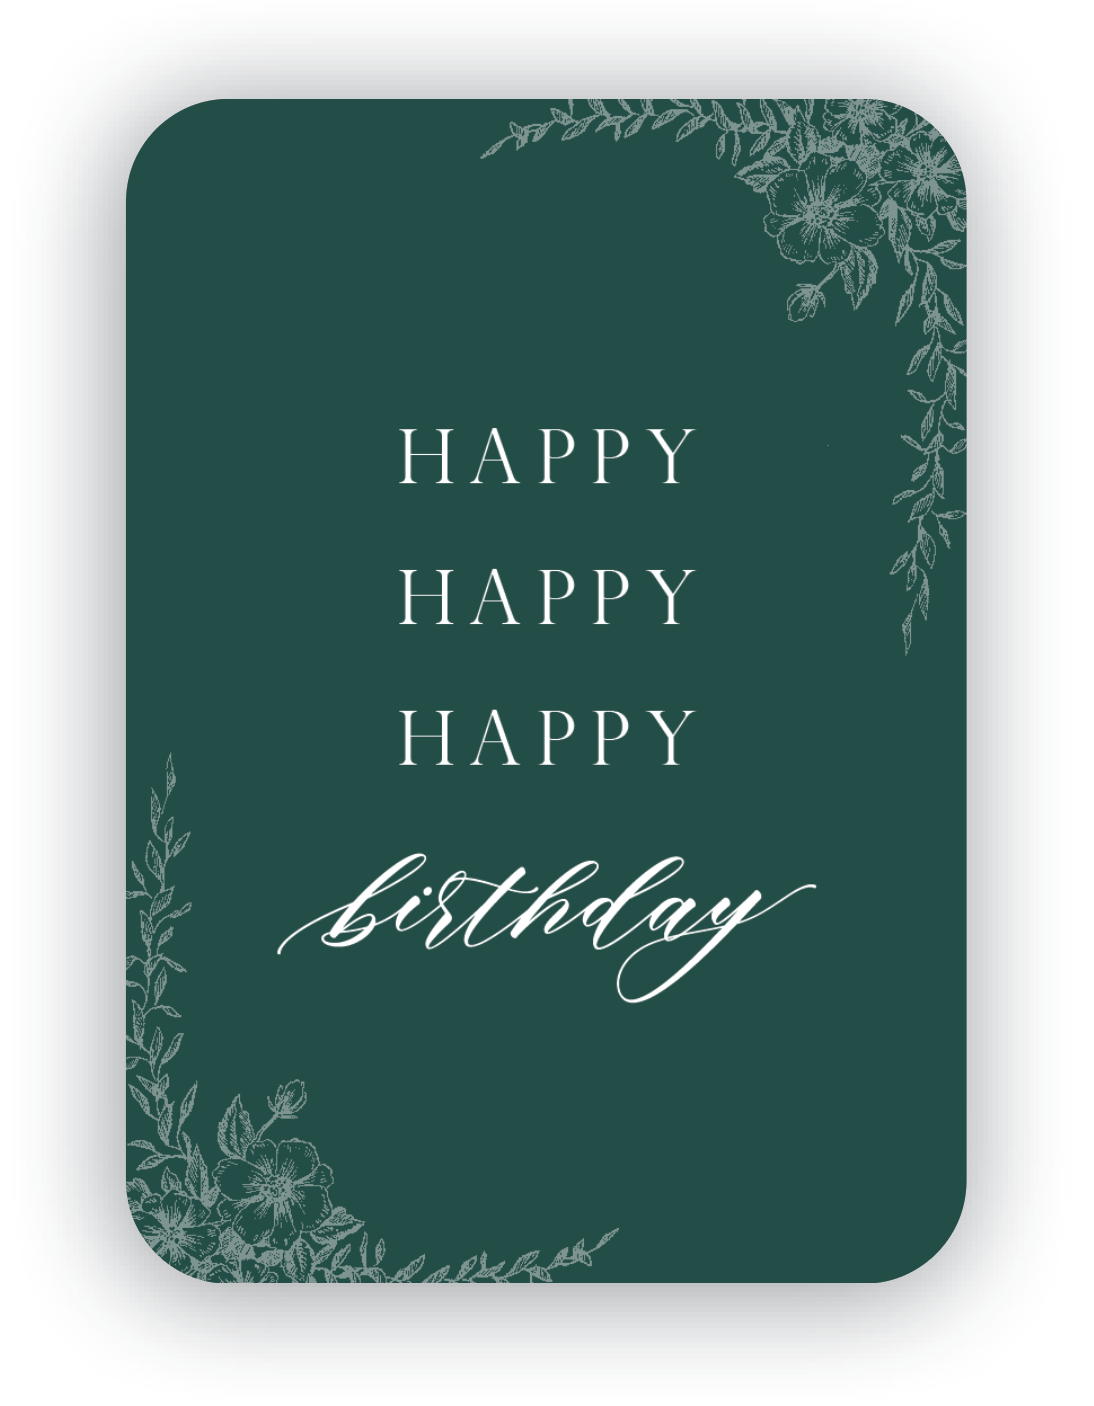 Digital forest green mini card with florals that says "Happy happy happy birthday" by Rust Belt Love